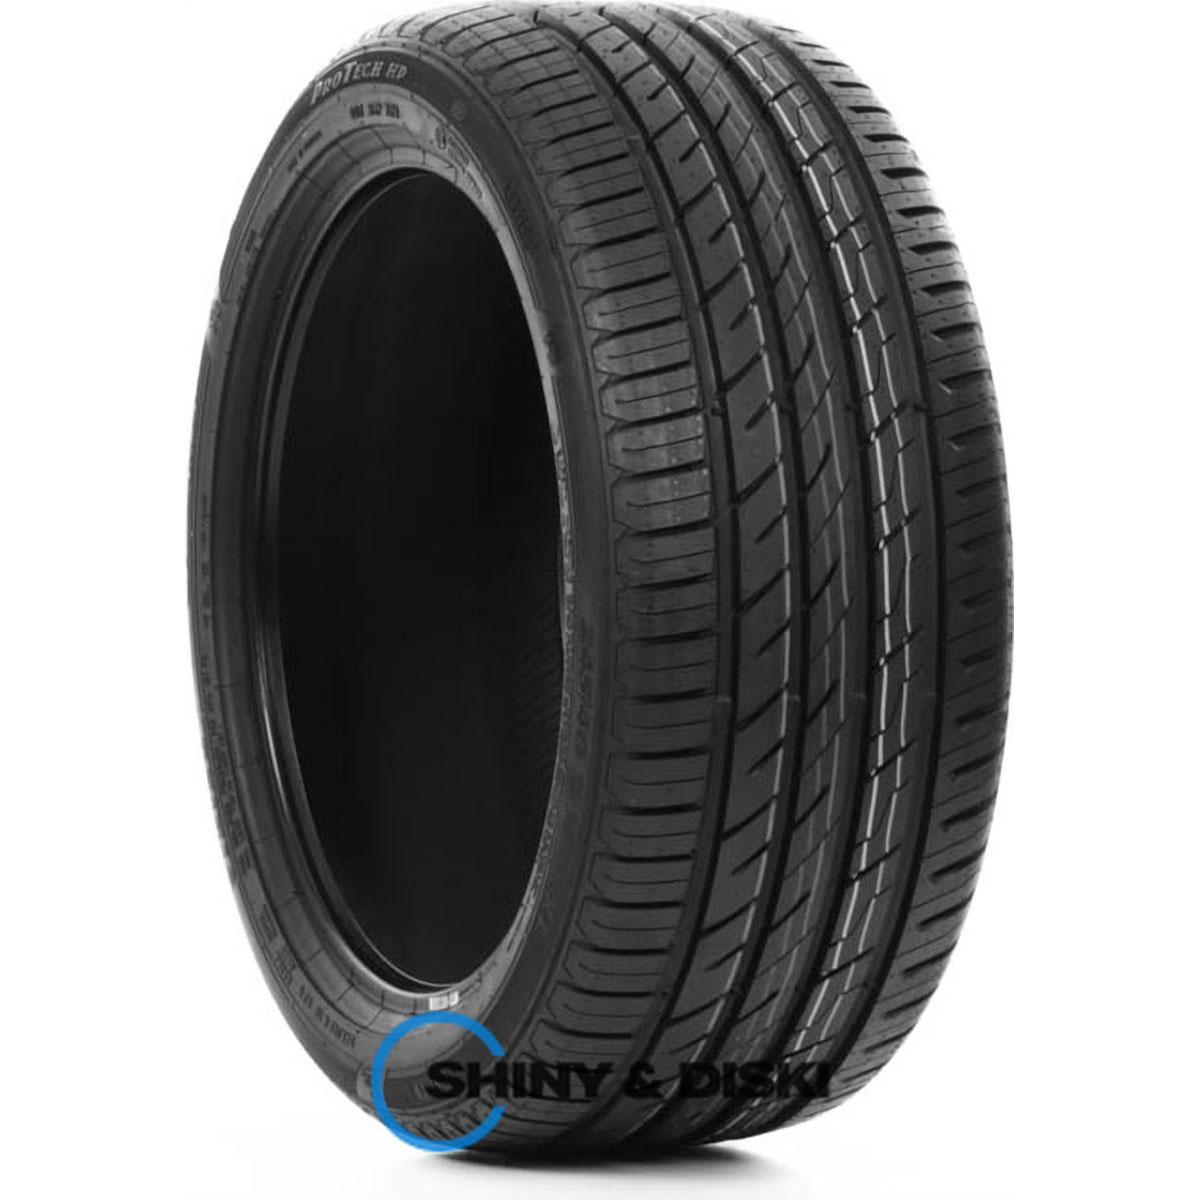 покрышки viking protech hp 245/40 r17 91y